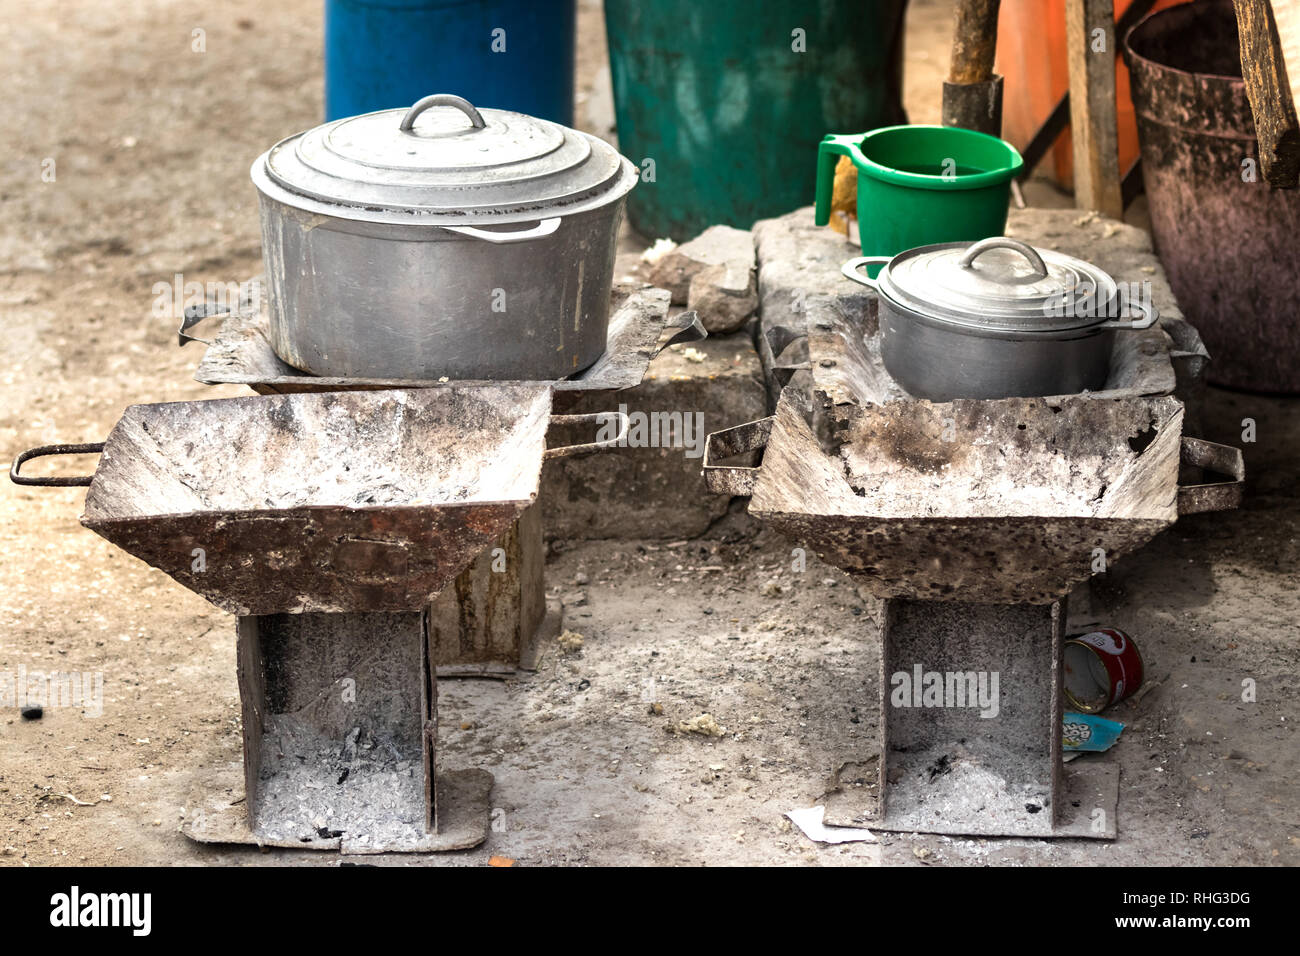 Rustic charcoal stoves and cookware, pots and pans on the floor at the local market of Toliara, Madagascar. Stock Photo